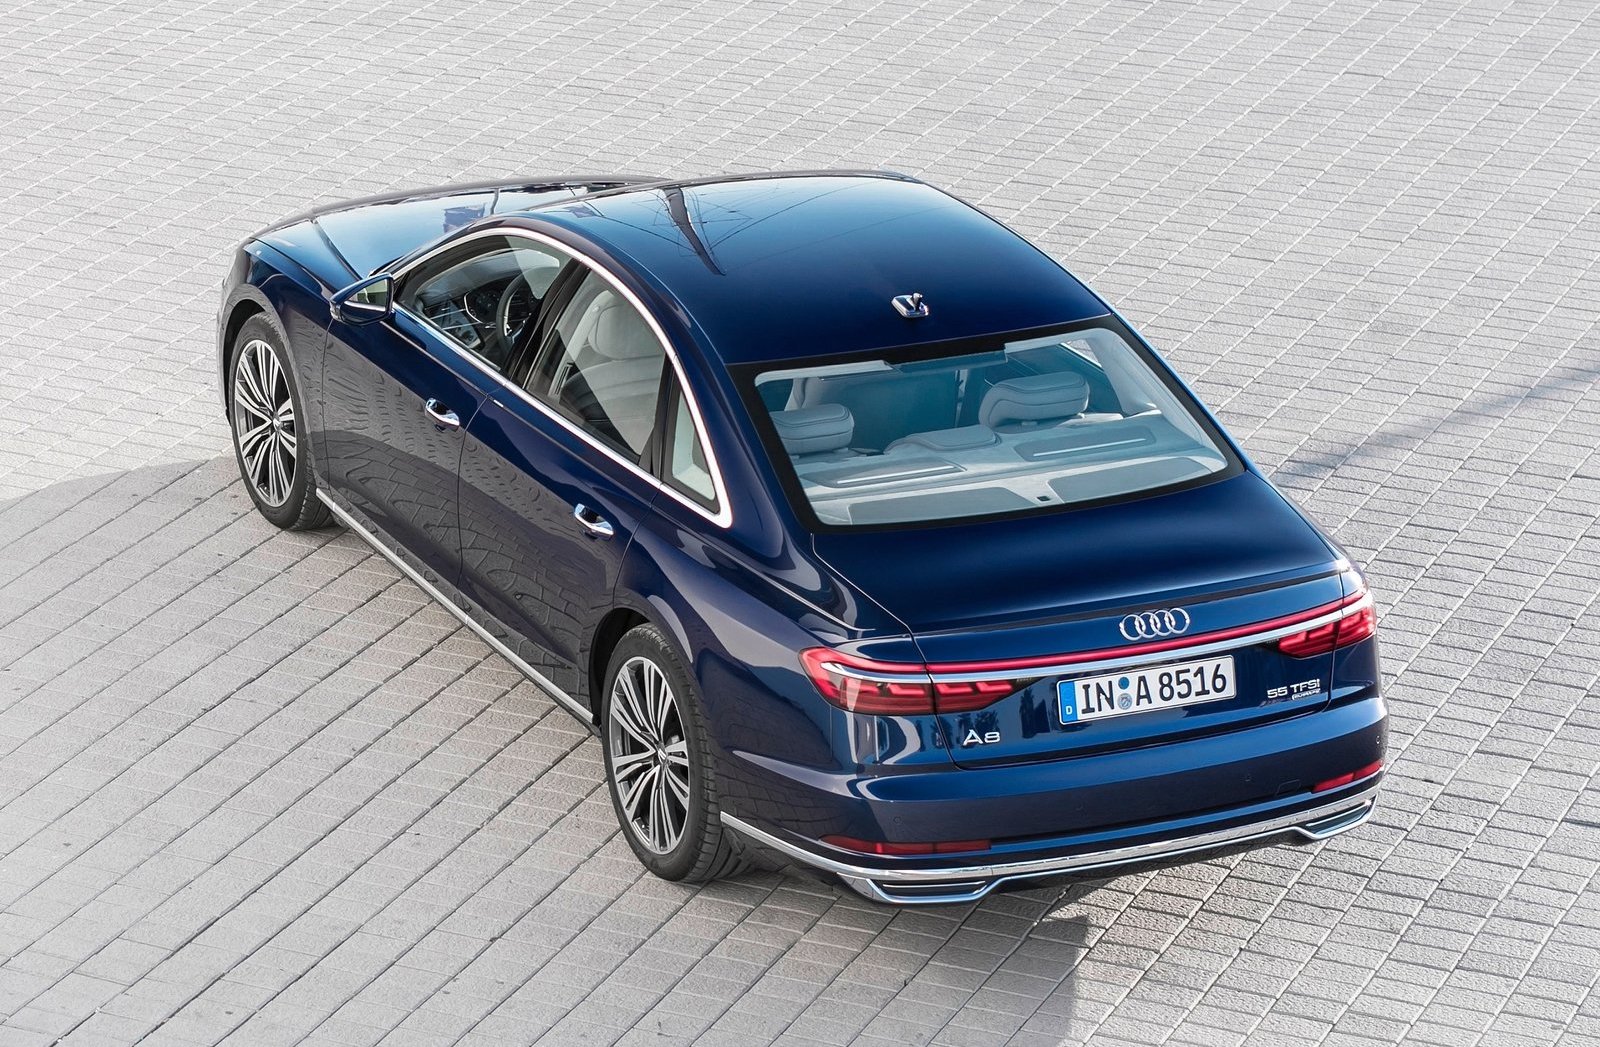 The Luxurious 2018 Audi A8: A Perfect Combination Of Power And Elegance